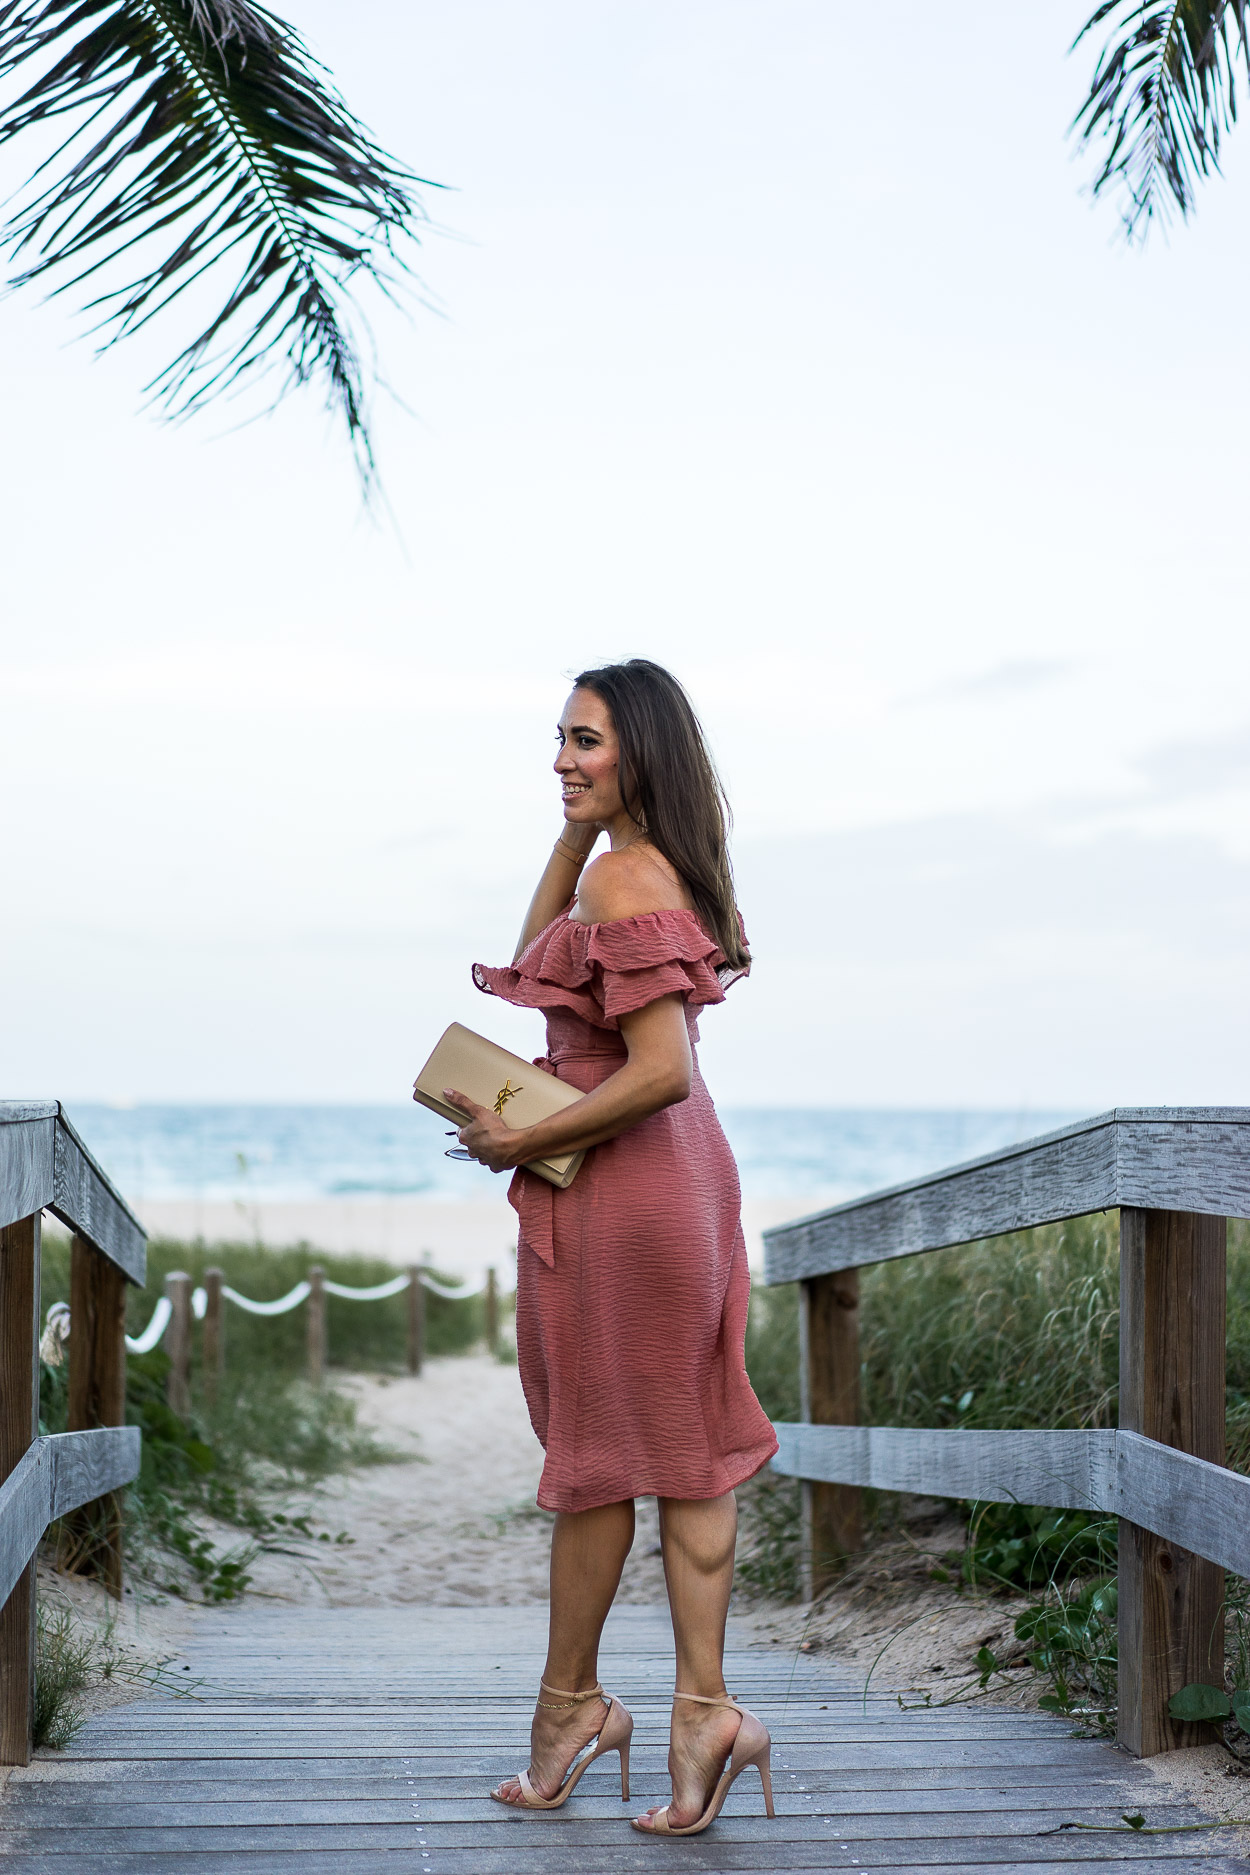 Beach style makes great Summer style like this Chicwish dress styled by South Florida blogger Amanda of A Glam Lifestyle